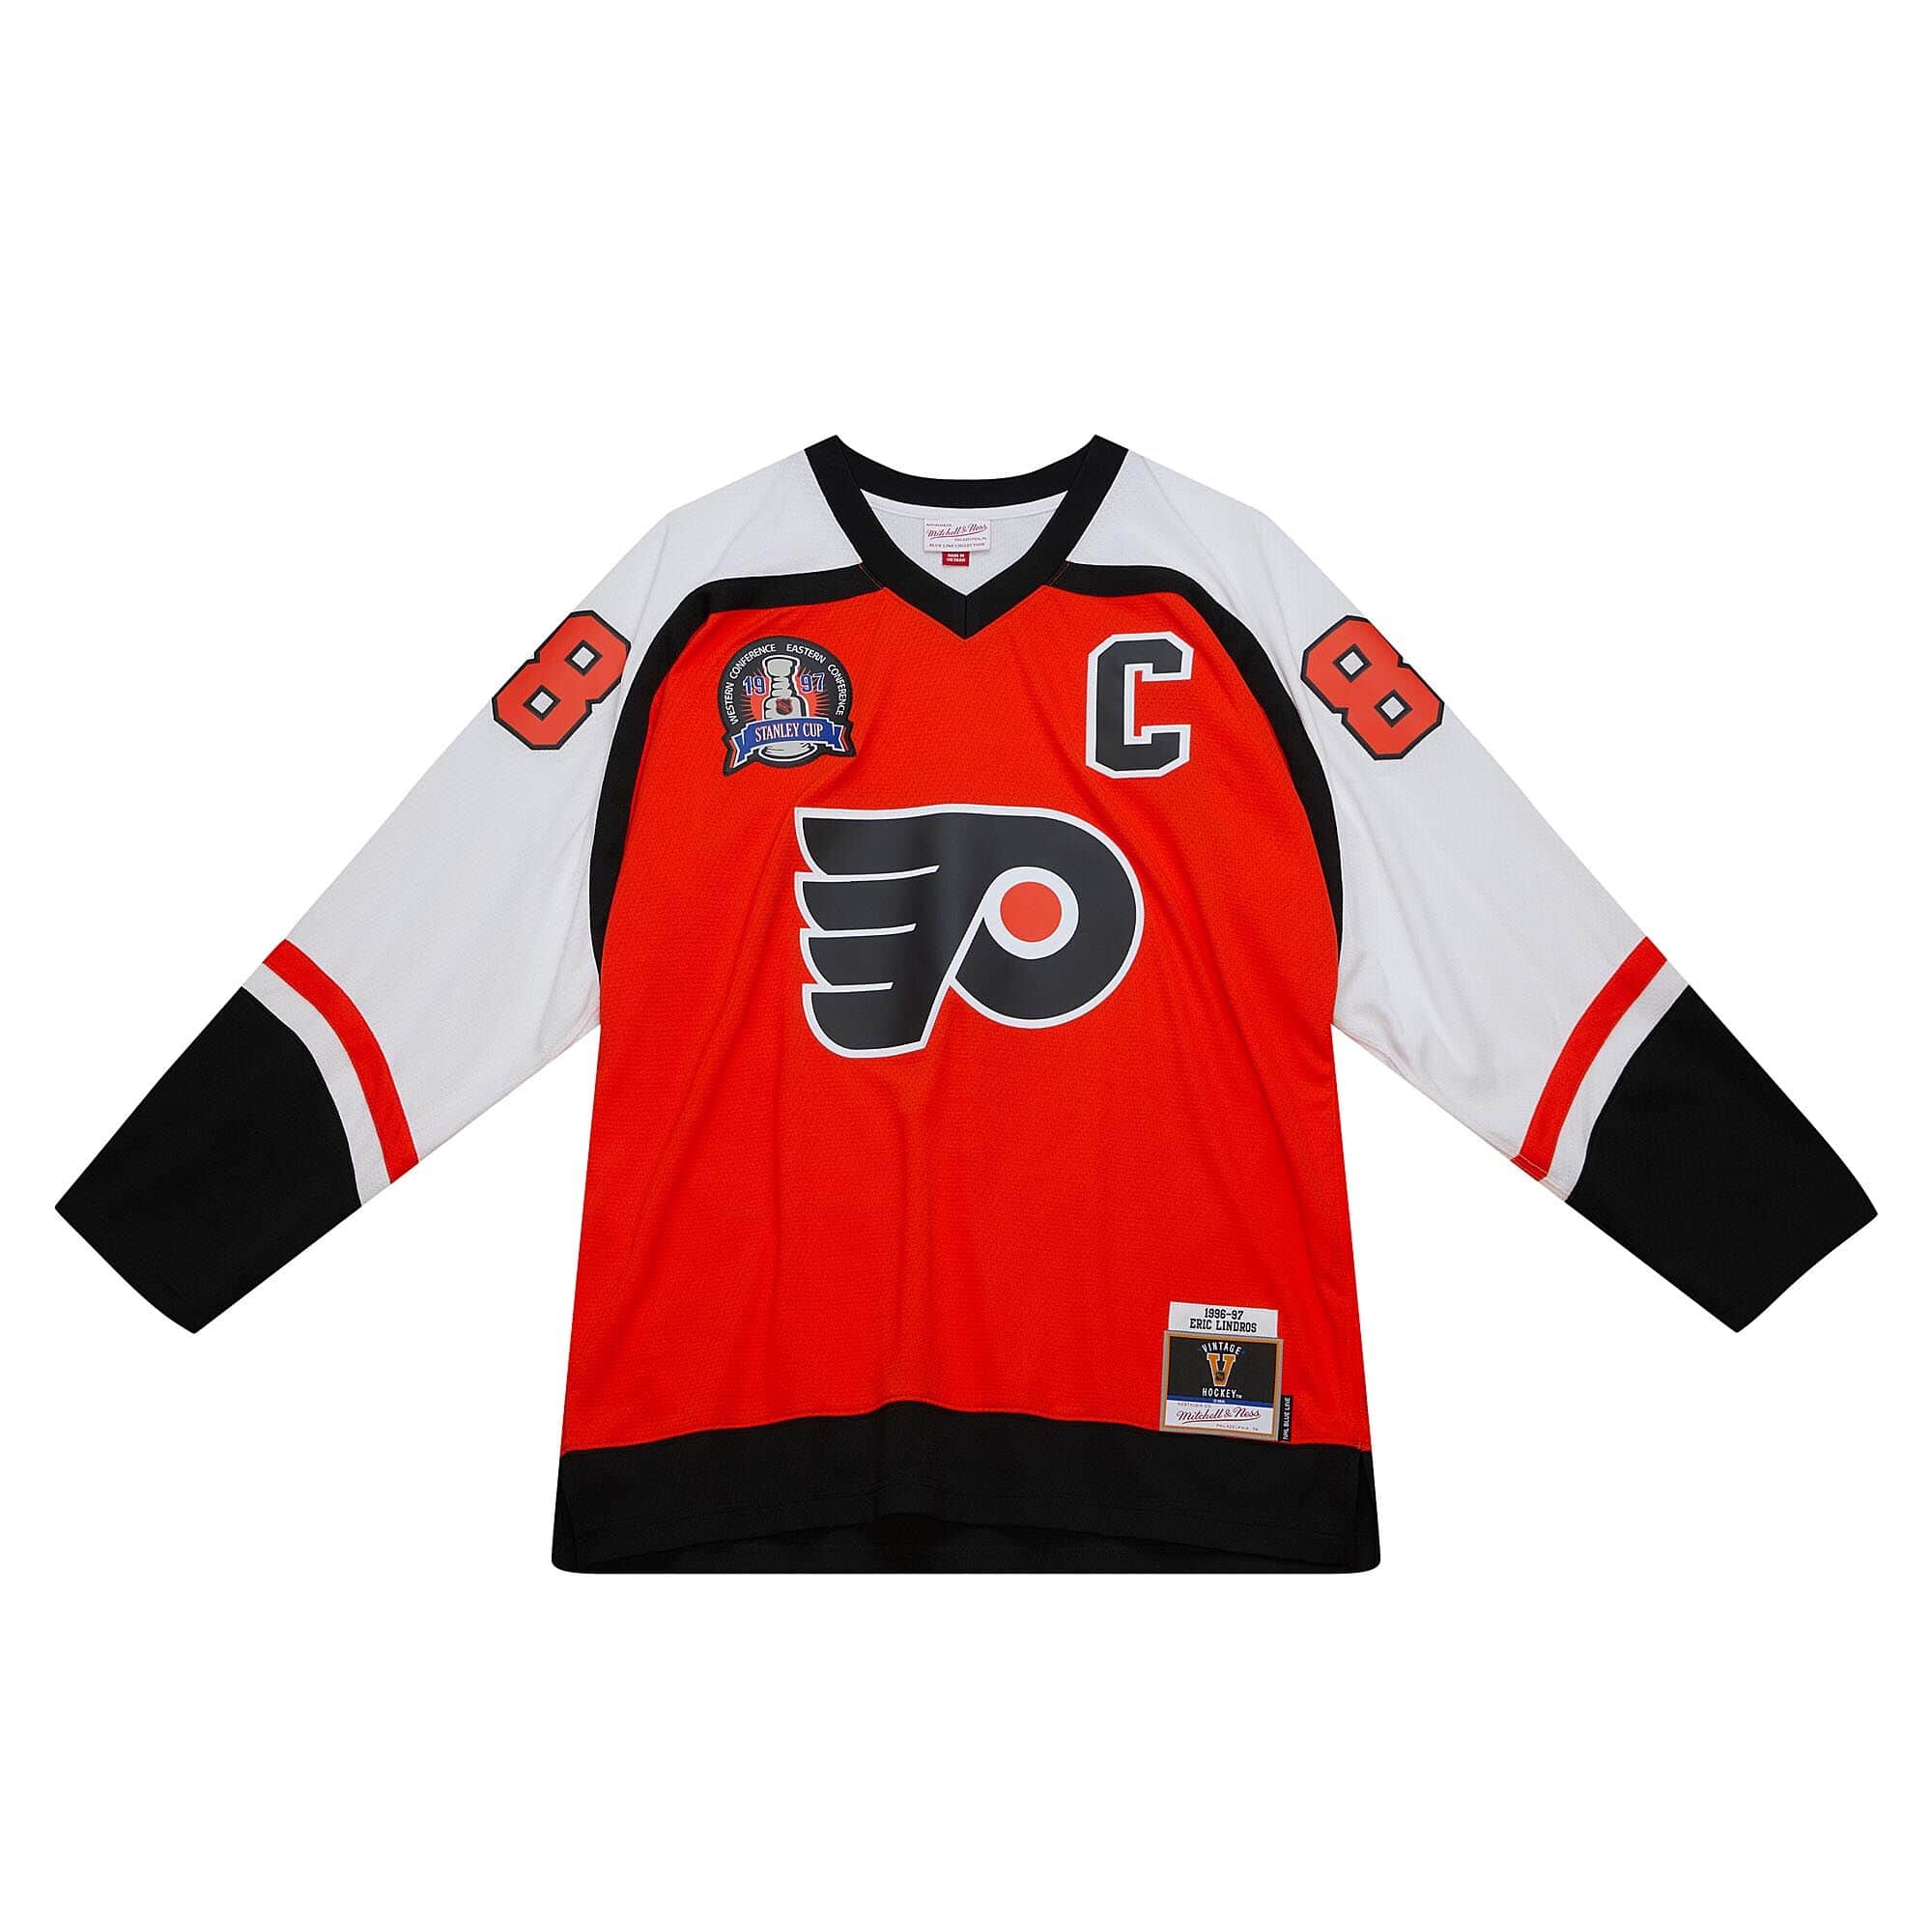 Flyers Hall of Fame gear